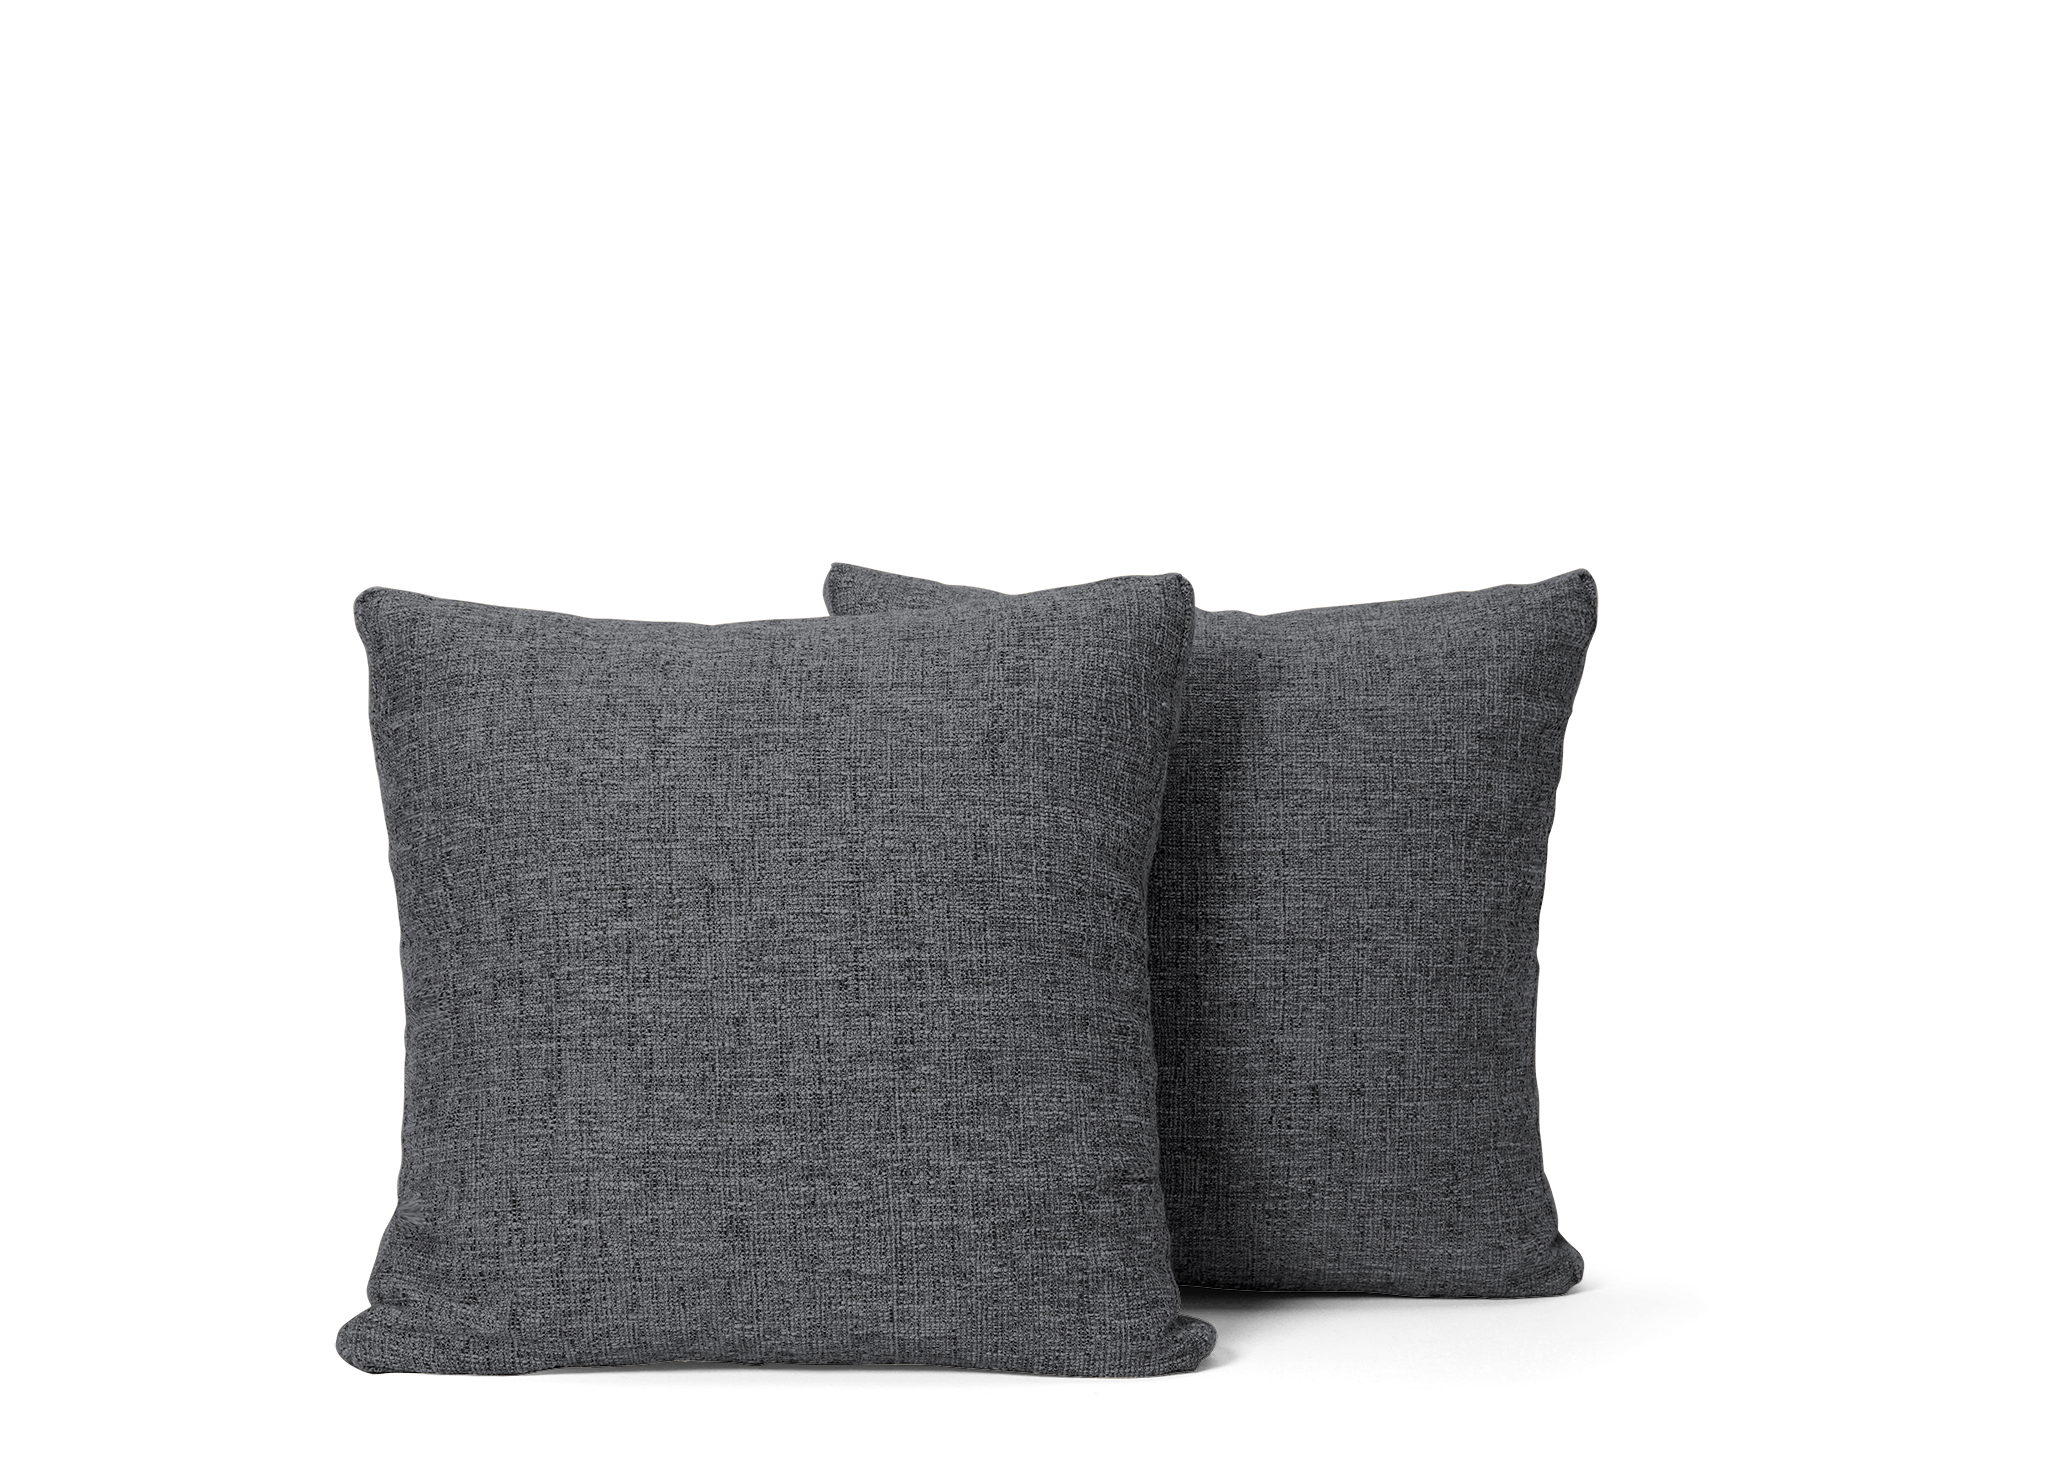 Decorative Boxed Pillows 18 x 18 (Set of 2)